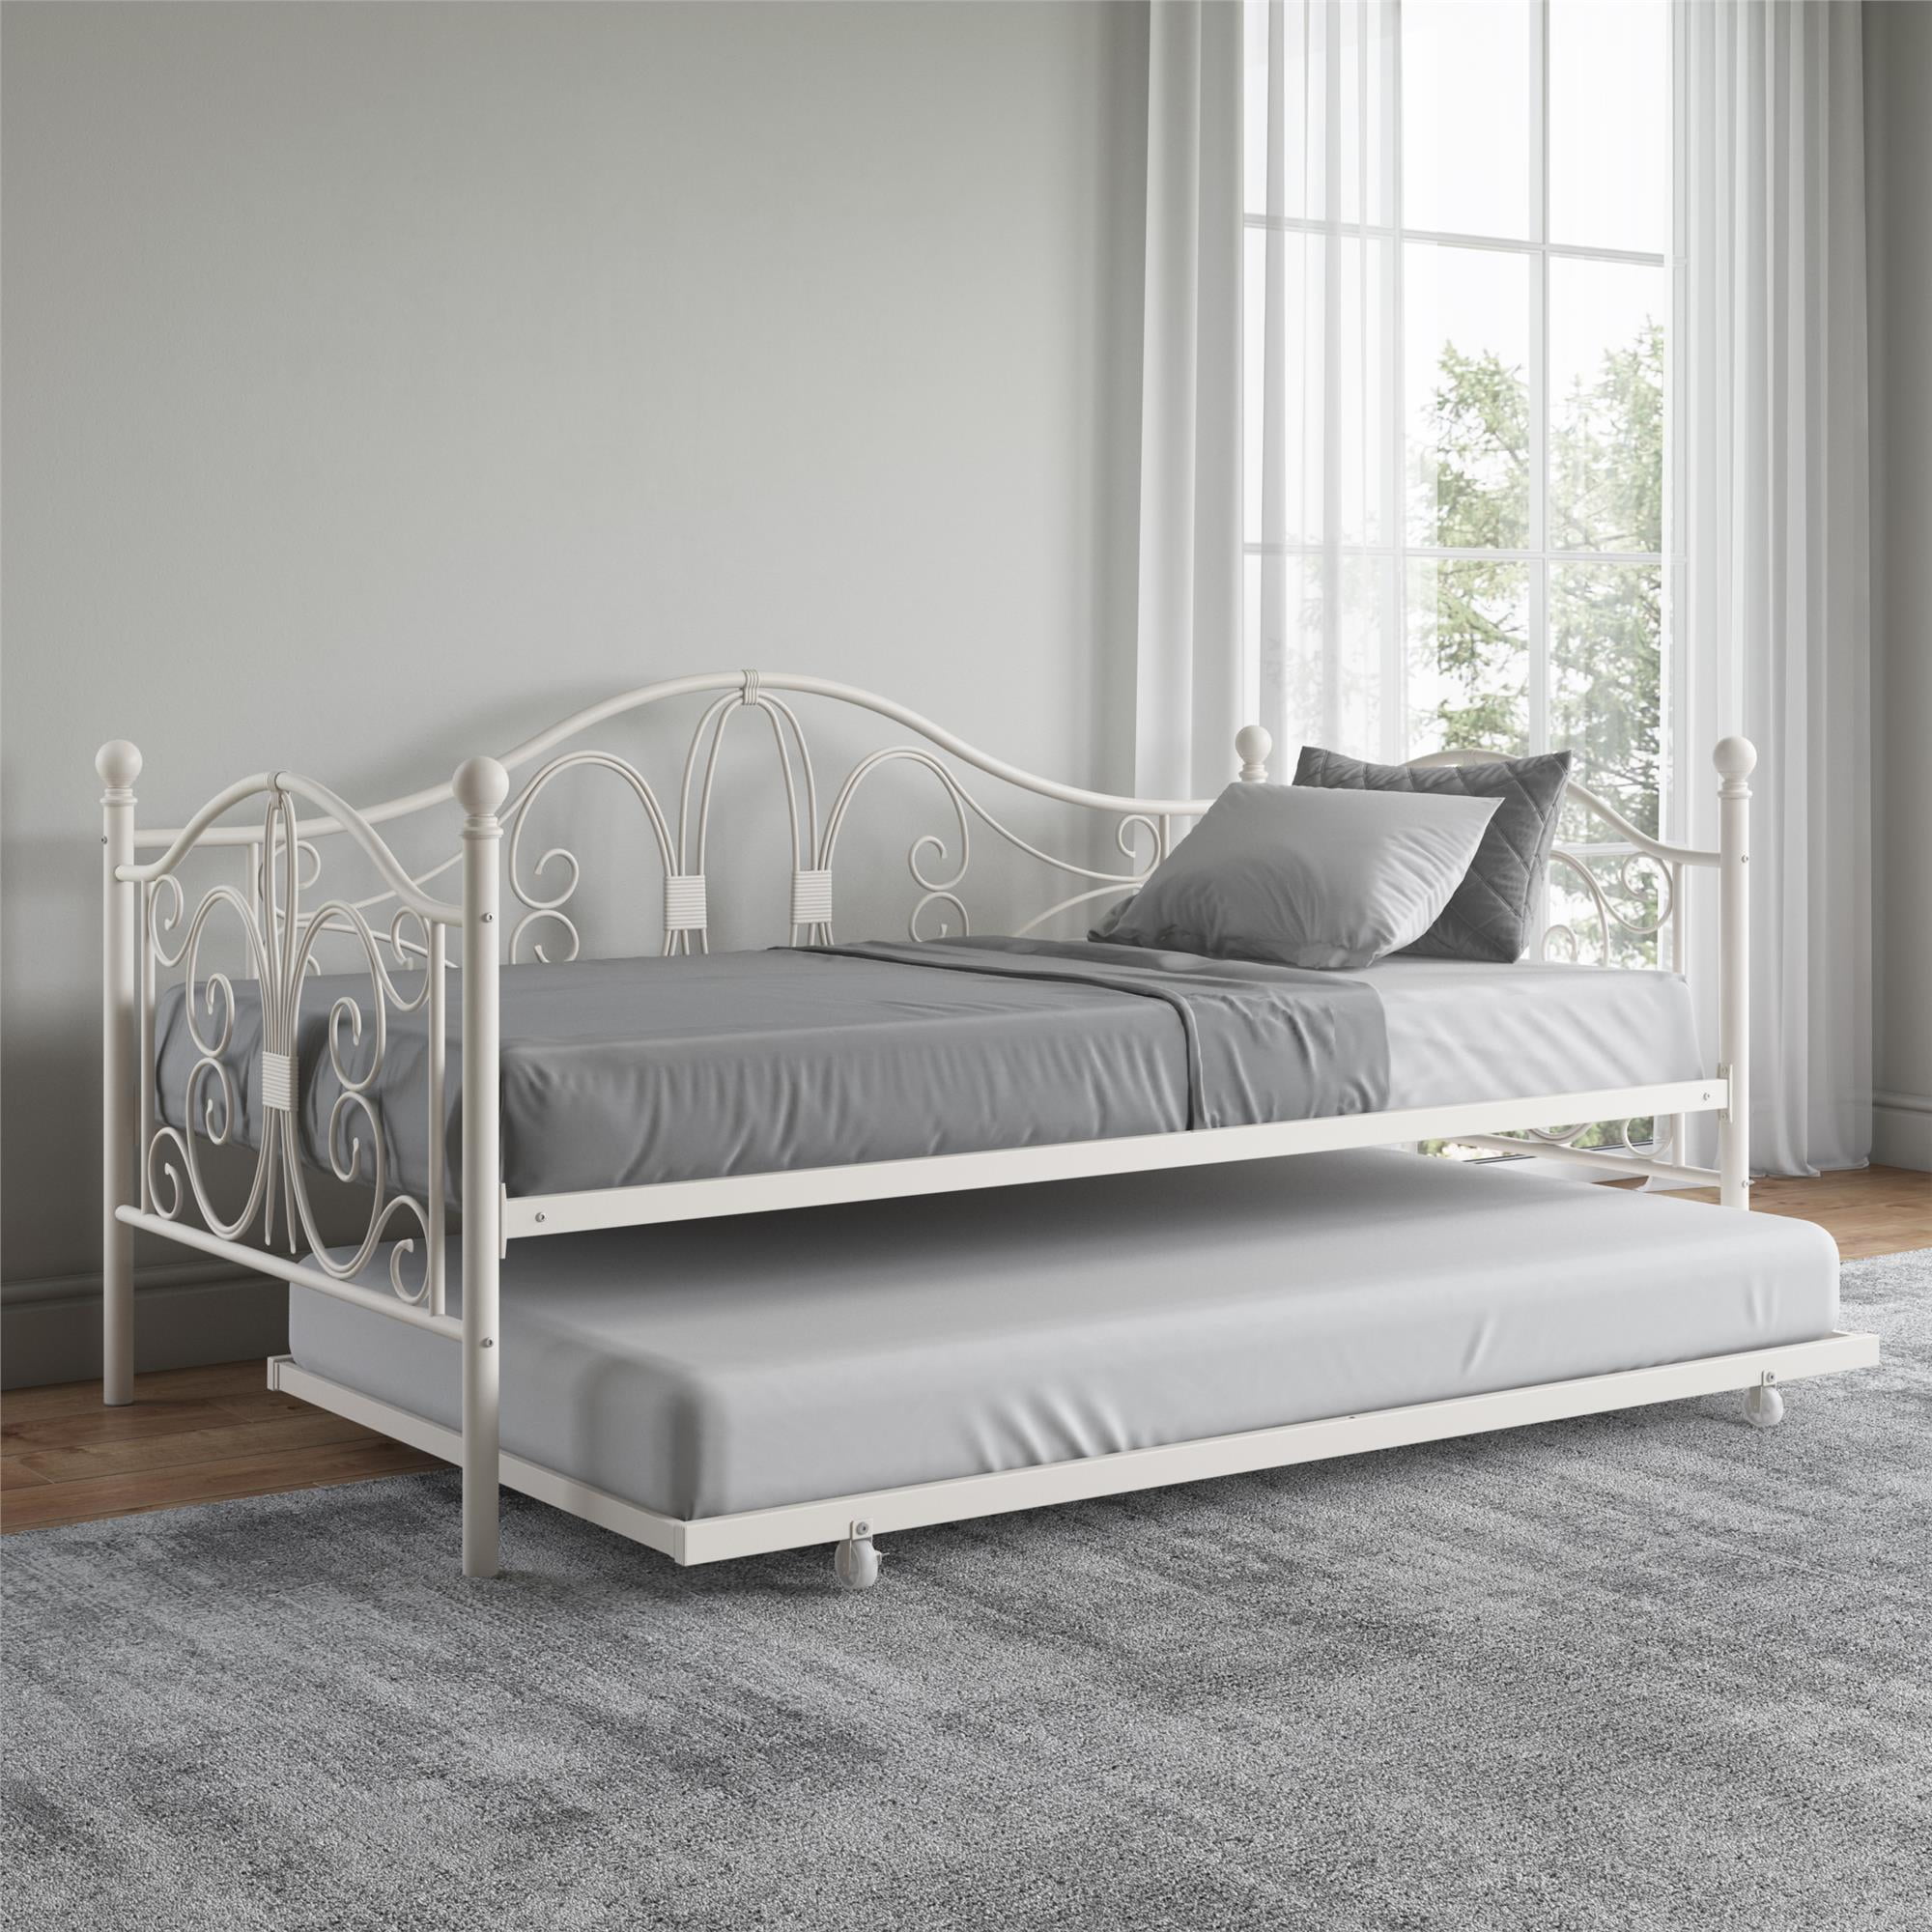 Dhp Ay Metal Daybed And Trundle, White Bed With Trundle Twin